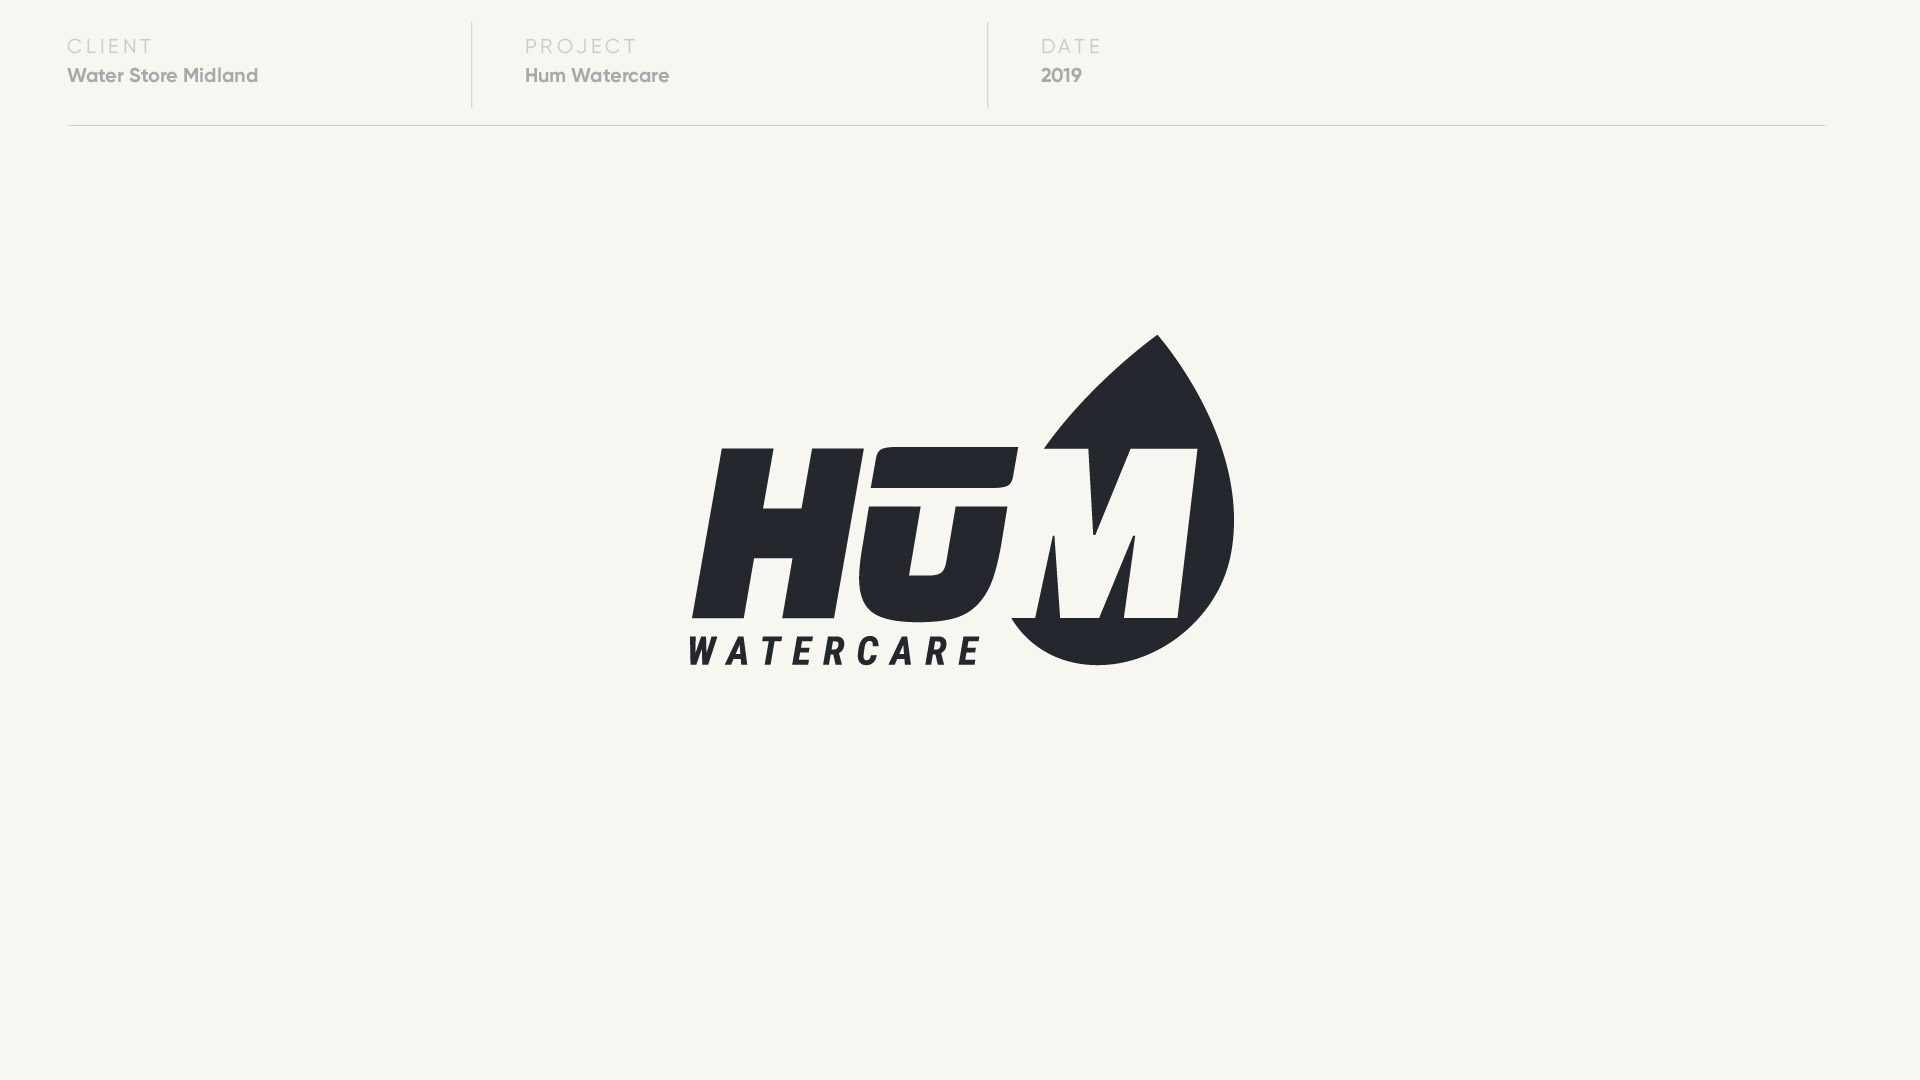 hum watercare logo design by anthony mika